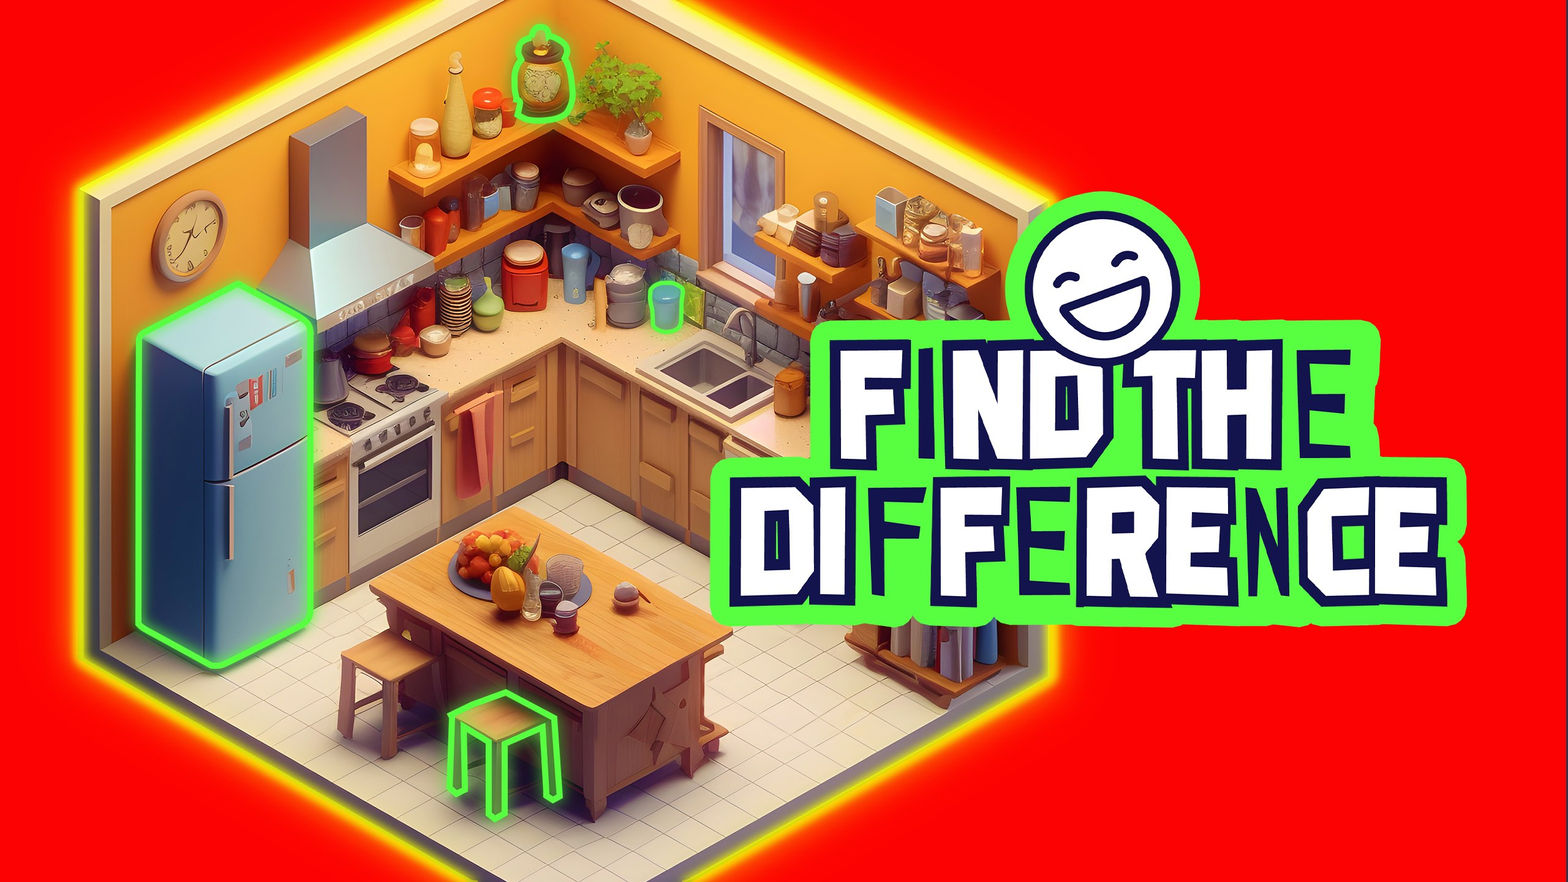 FTD: Find the Difference